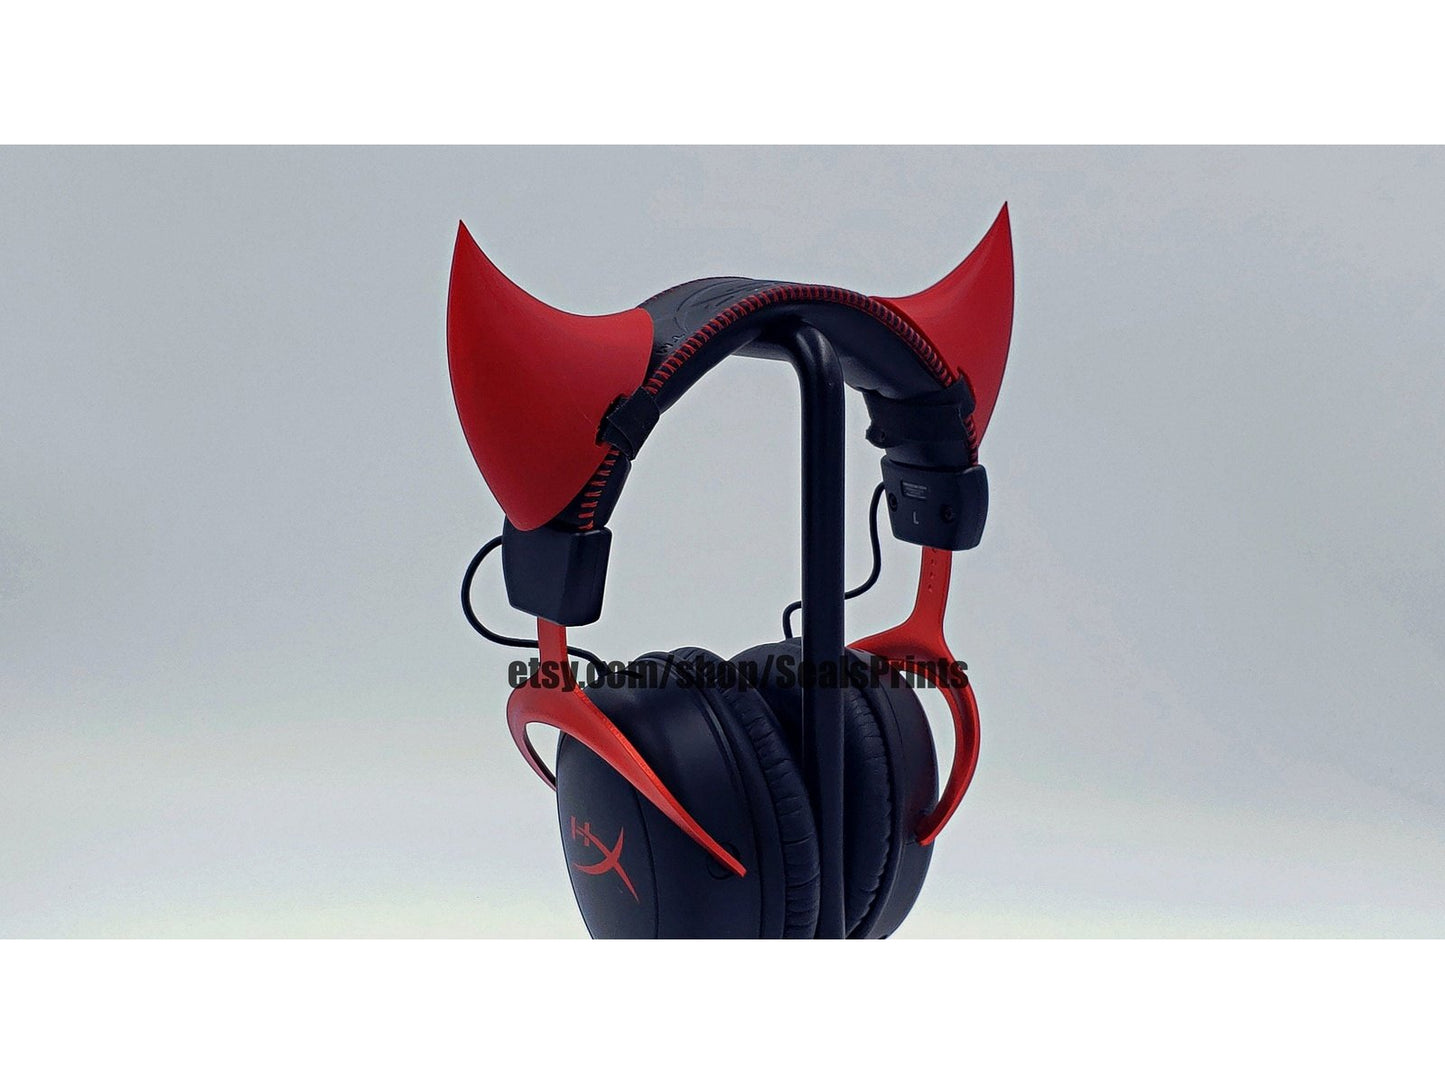 spike devil Horn Attachment for Headset, Gaming and Streaming Headset Accessories, cosplay, Streaming Prop, gaming streamer gift